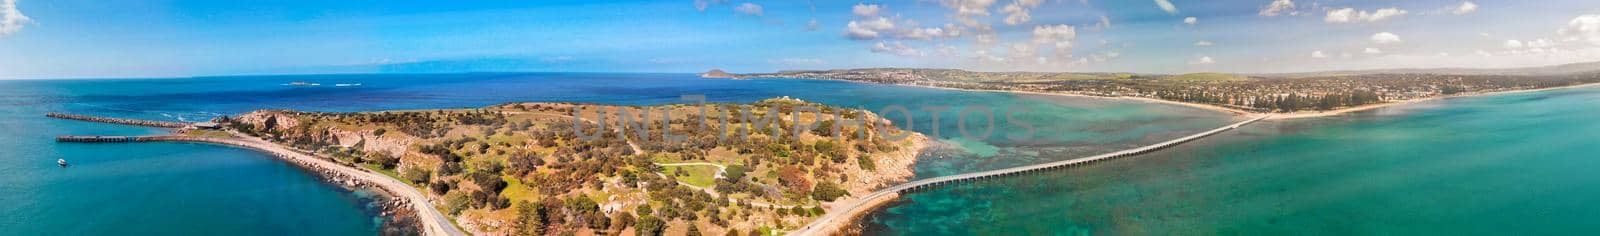 Panoramic aerial view of Granite Island and Victor Harbour, Australia by jovannig